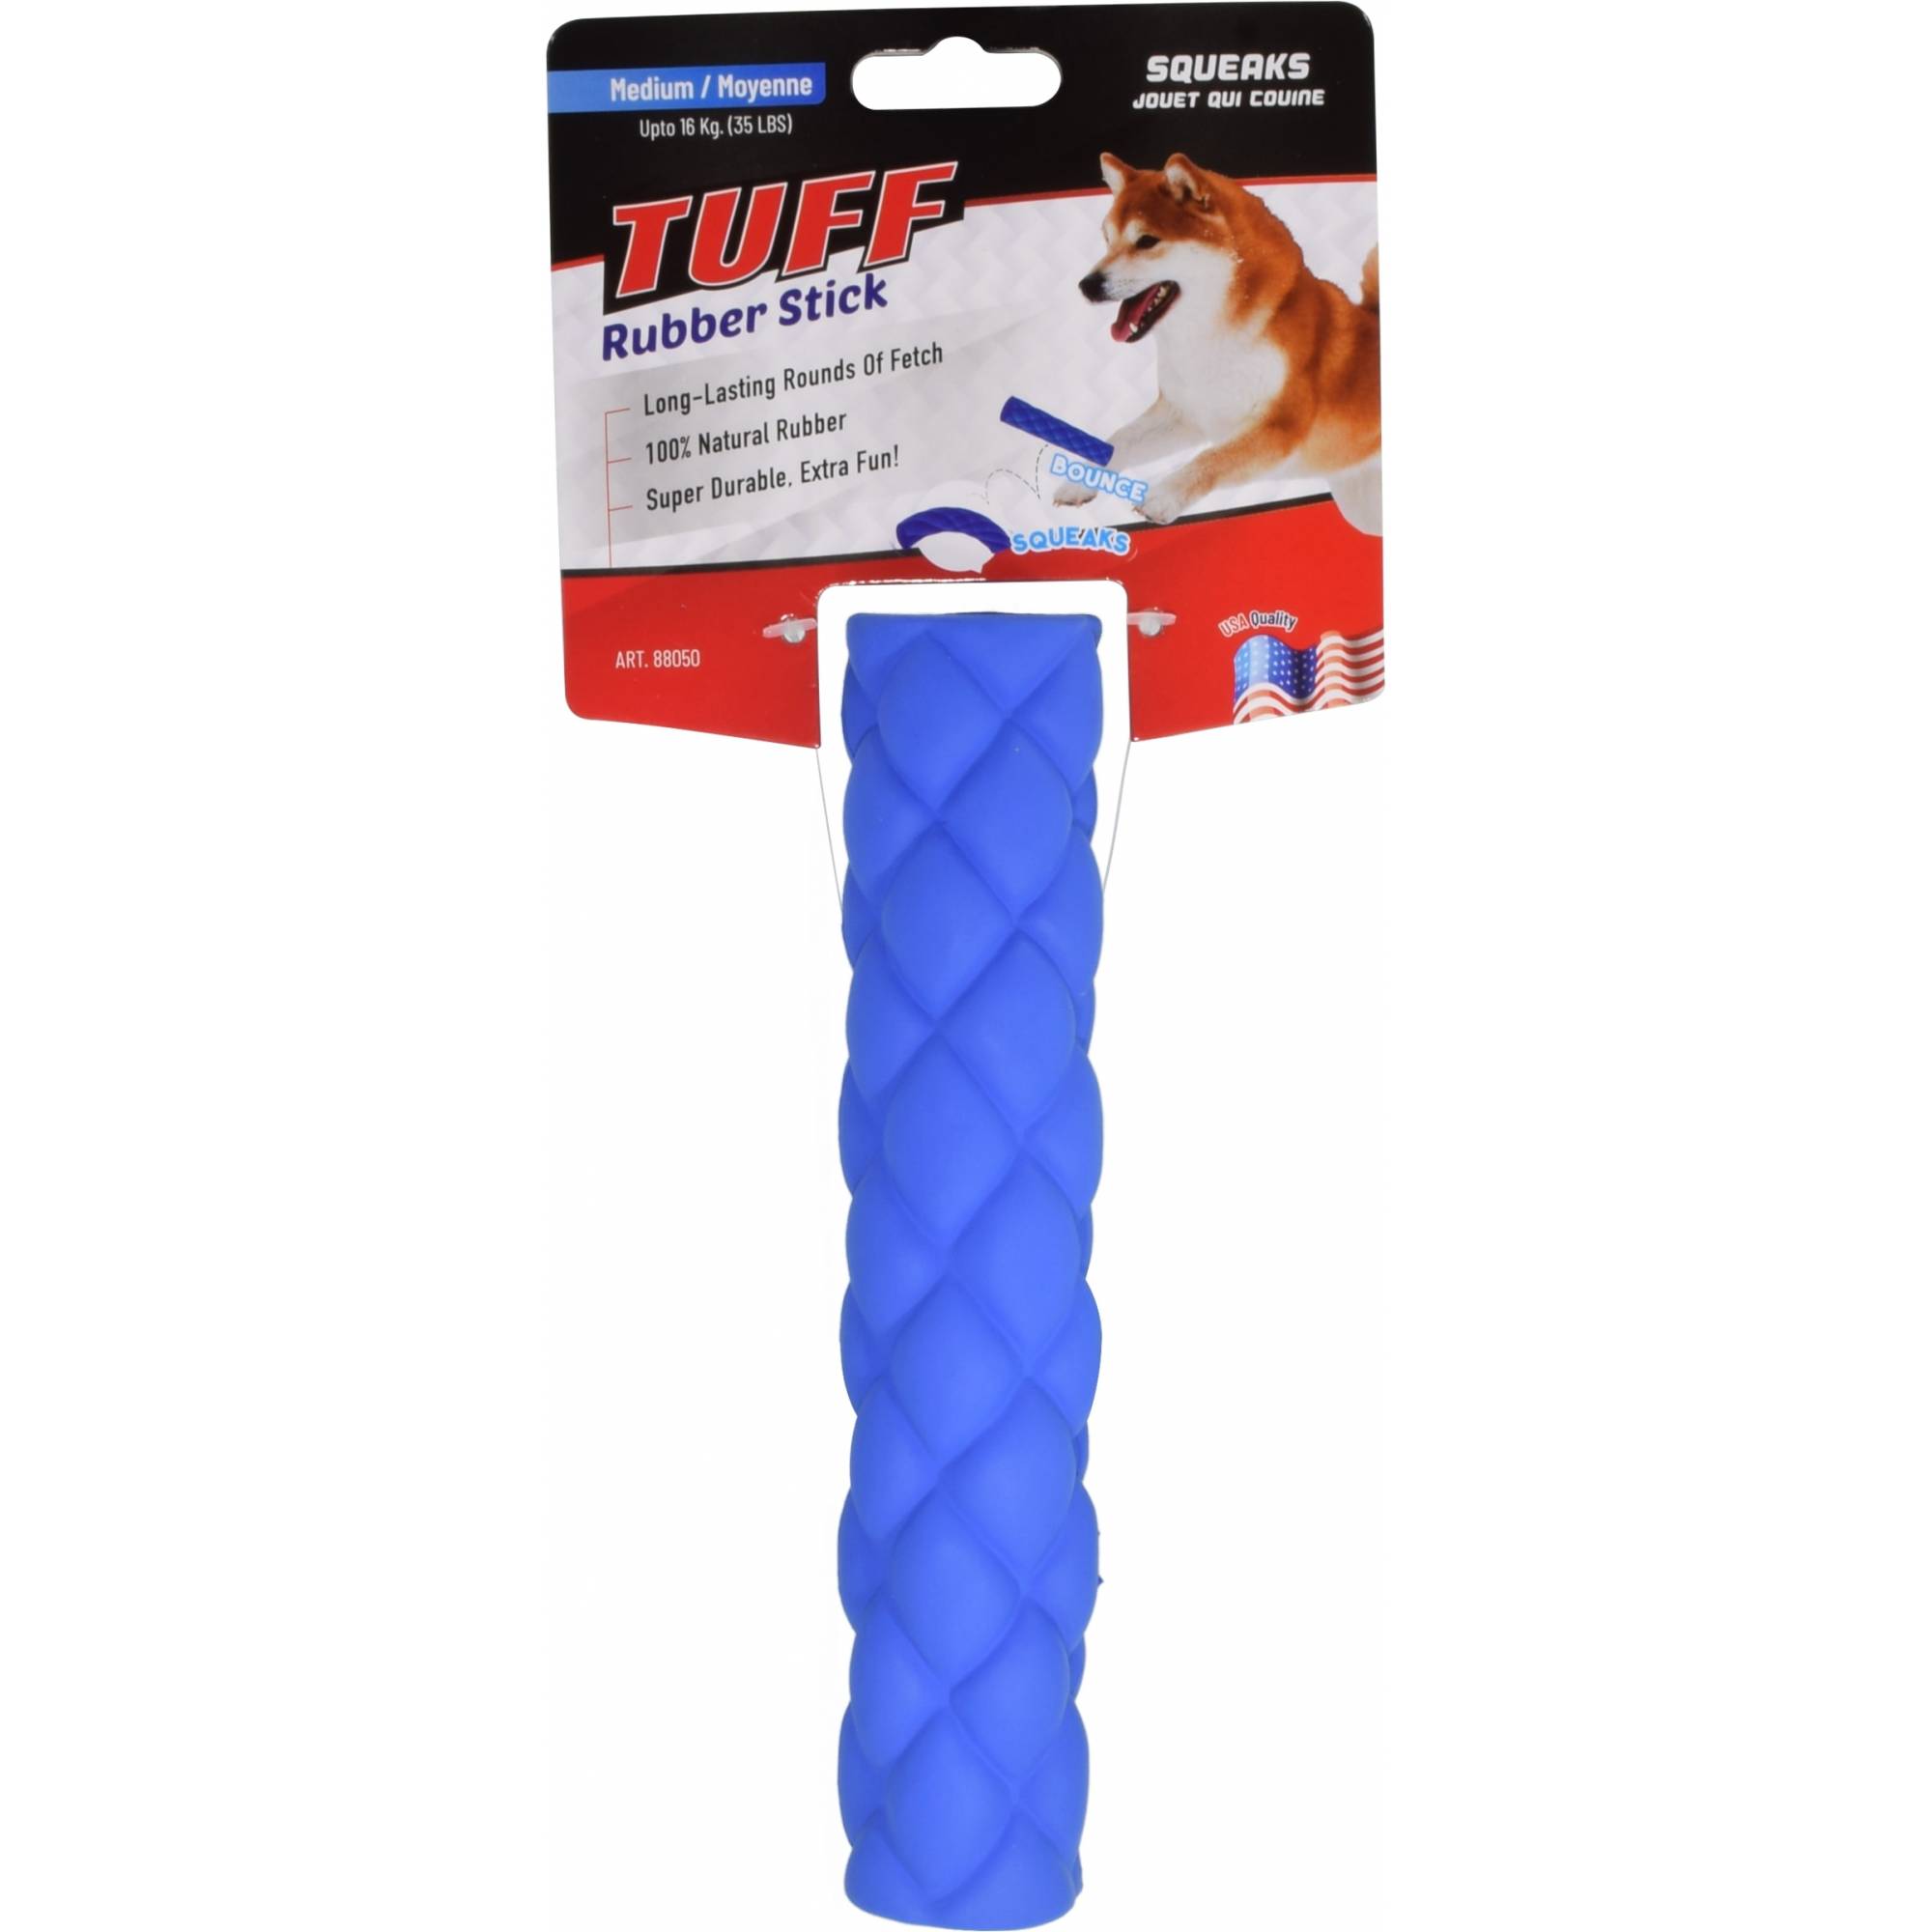 Tuff by Pet Protect - Rubber Stick Chew Toy